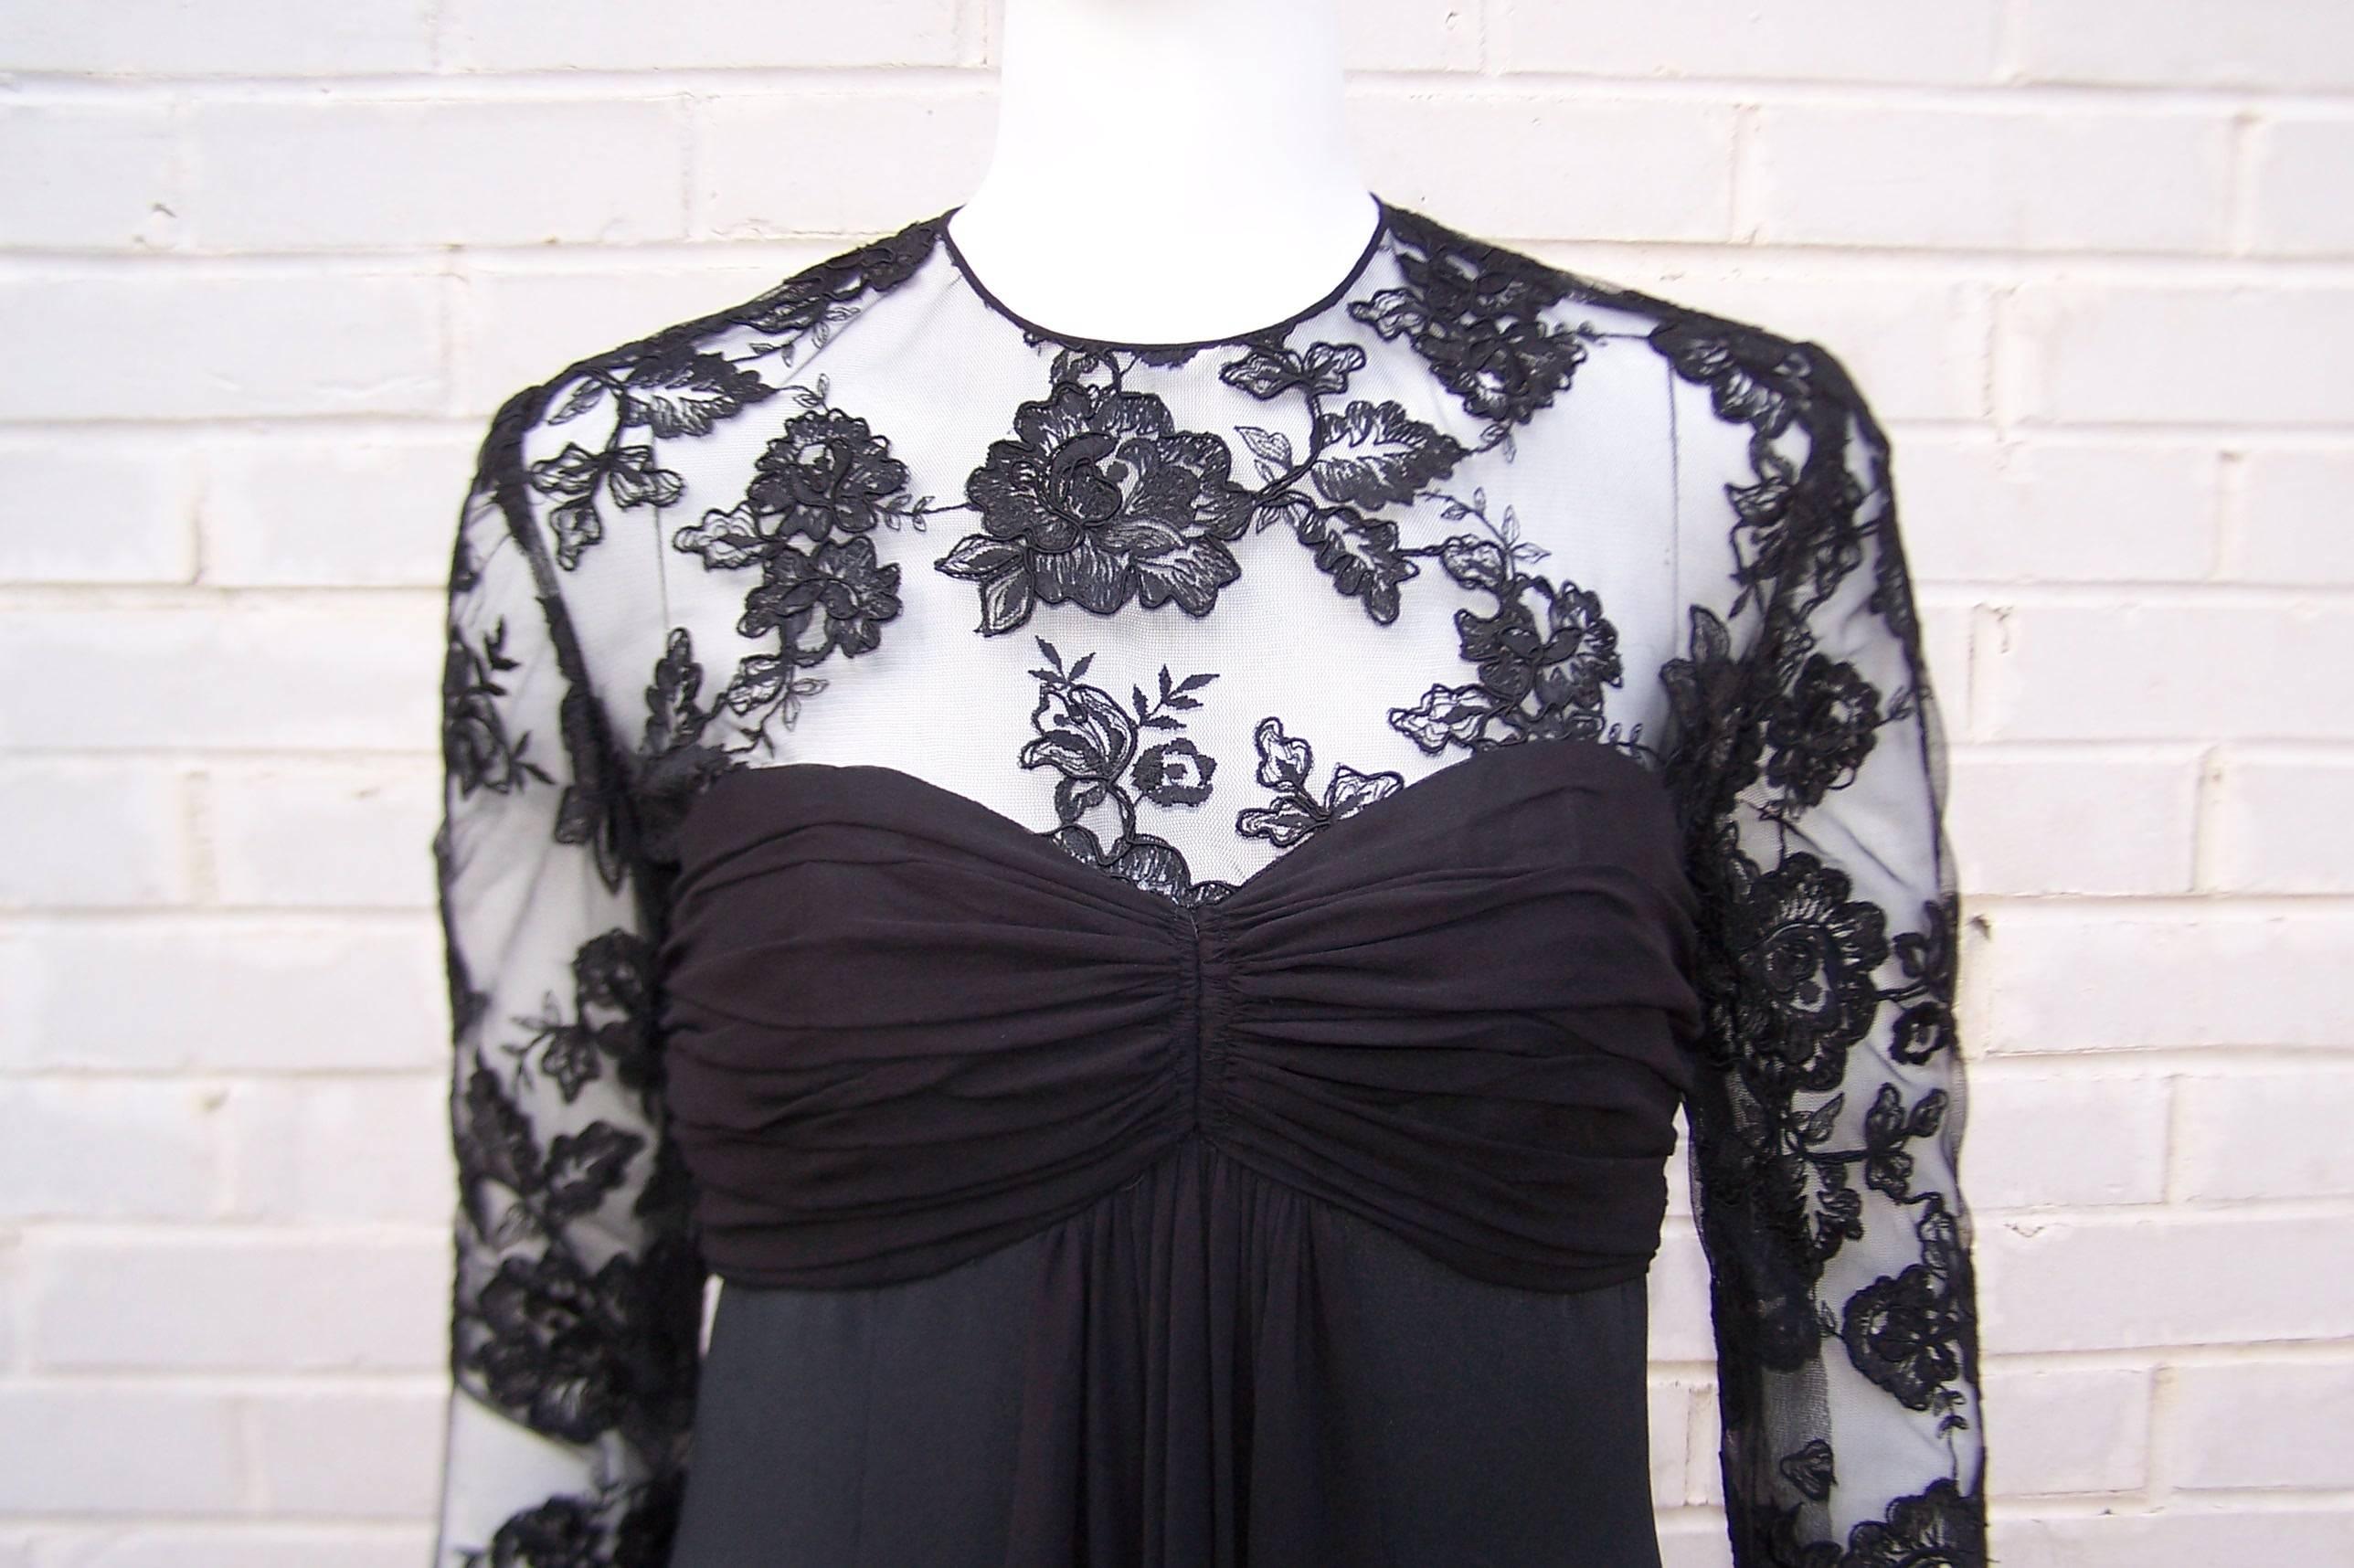 Women's Adele Simpson Black Silk Cocktail Dress With Lace Bodice, C.1980 For Sale